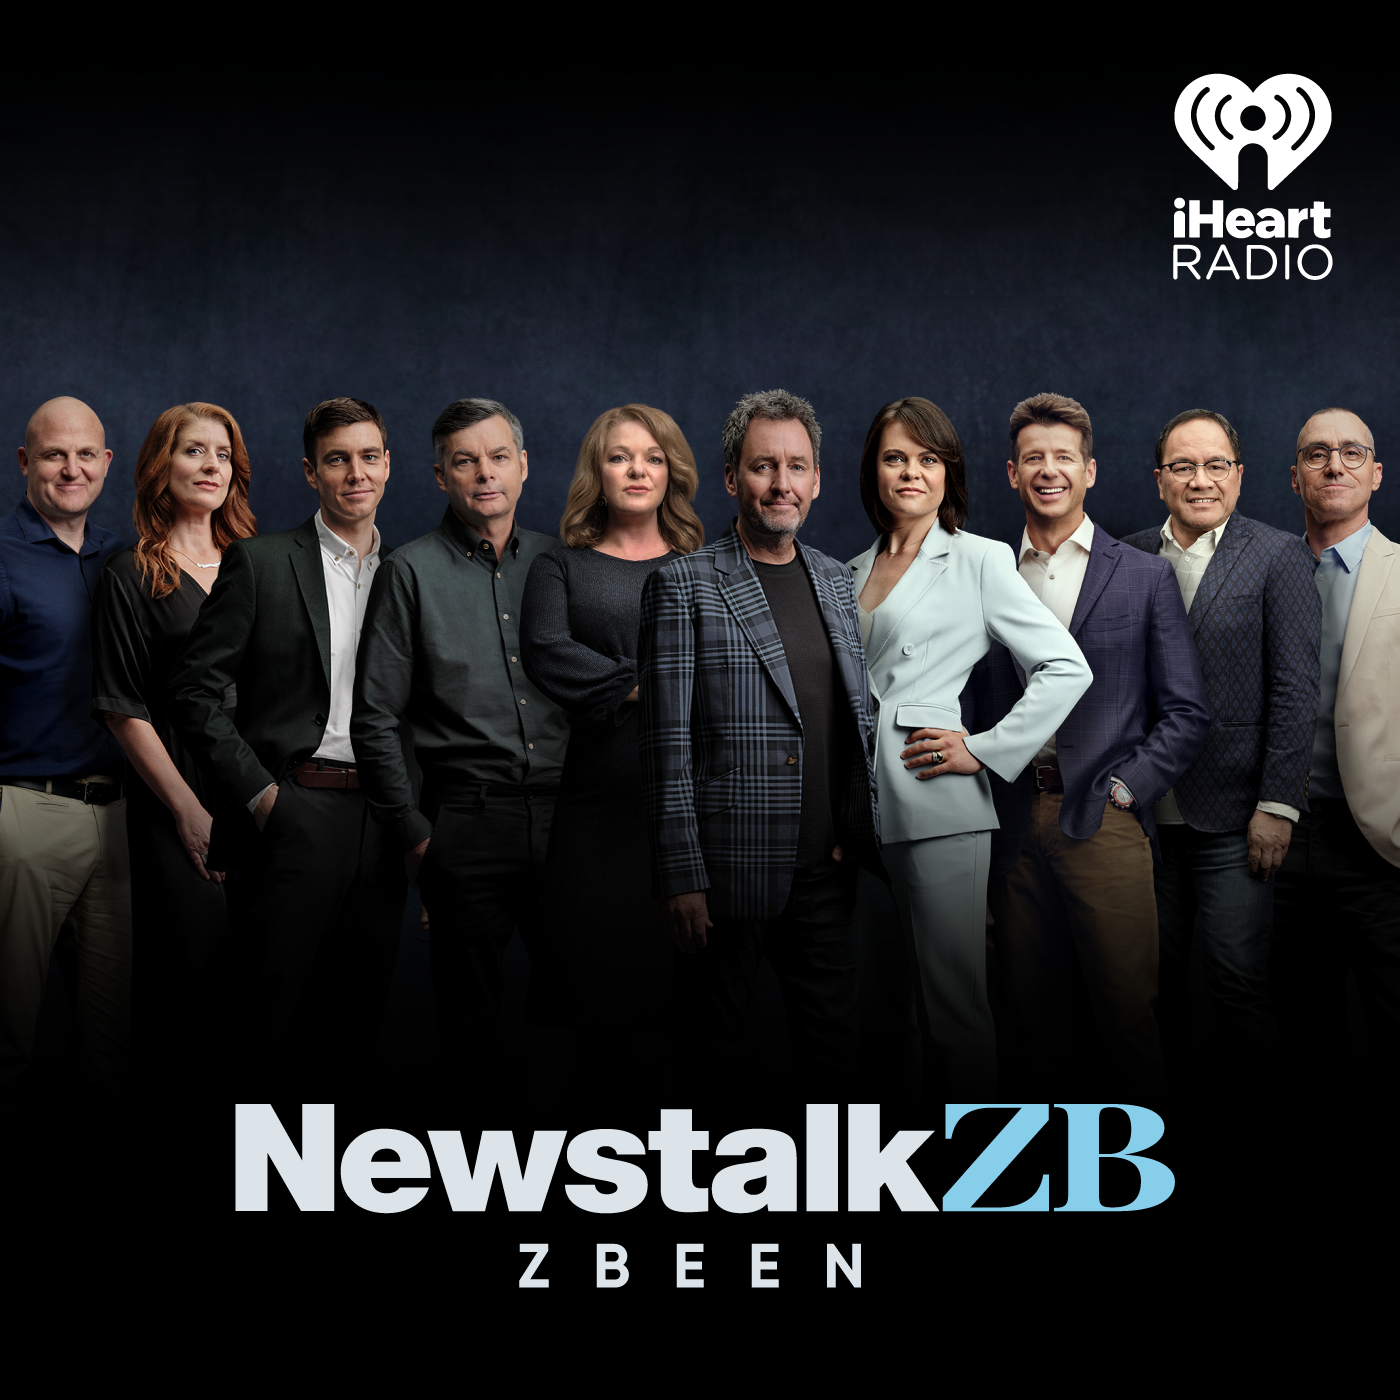 NEWSTALK ZBEEN: There's a Lot Riding On This